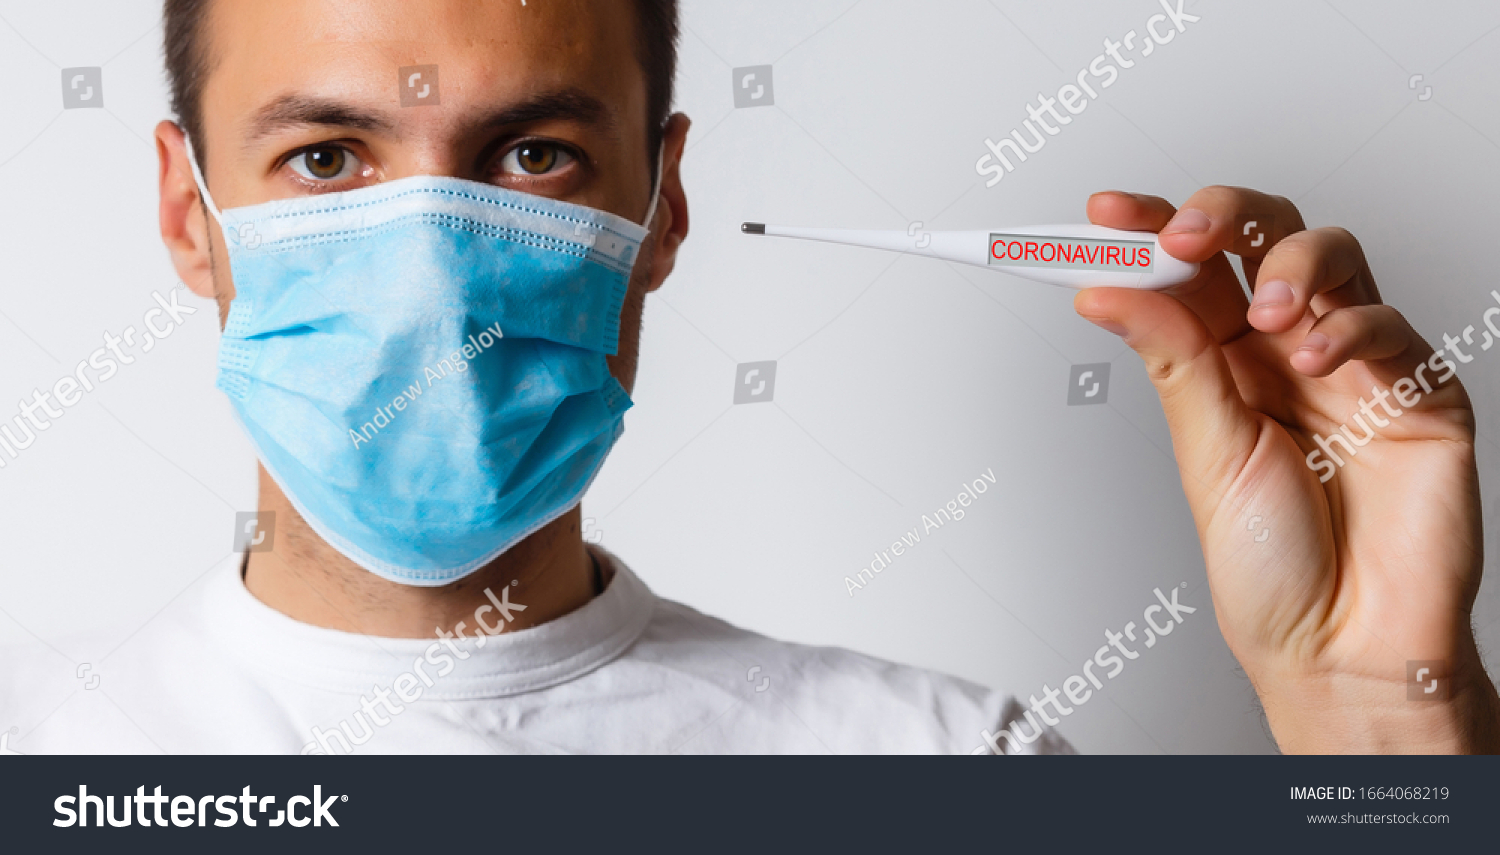 Coronavirus. 2019 Novel Coronavirus (2019-nCoV), Wuhan, China. A man with Coronavirus reads his temperature on a thermometer. Isolated on white. Room for text. Clipping Path. #1664068219